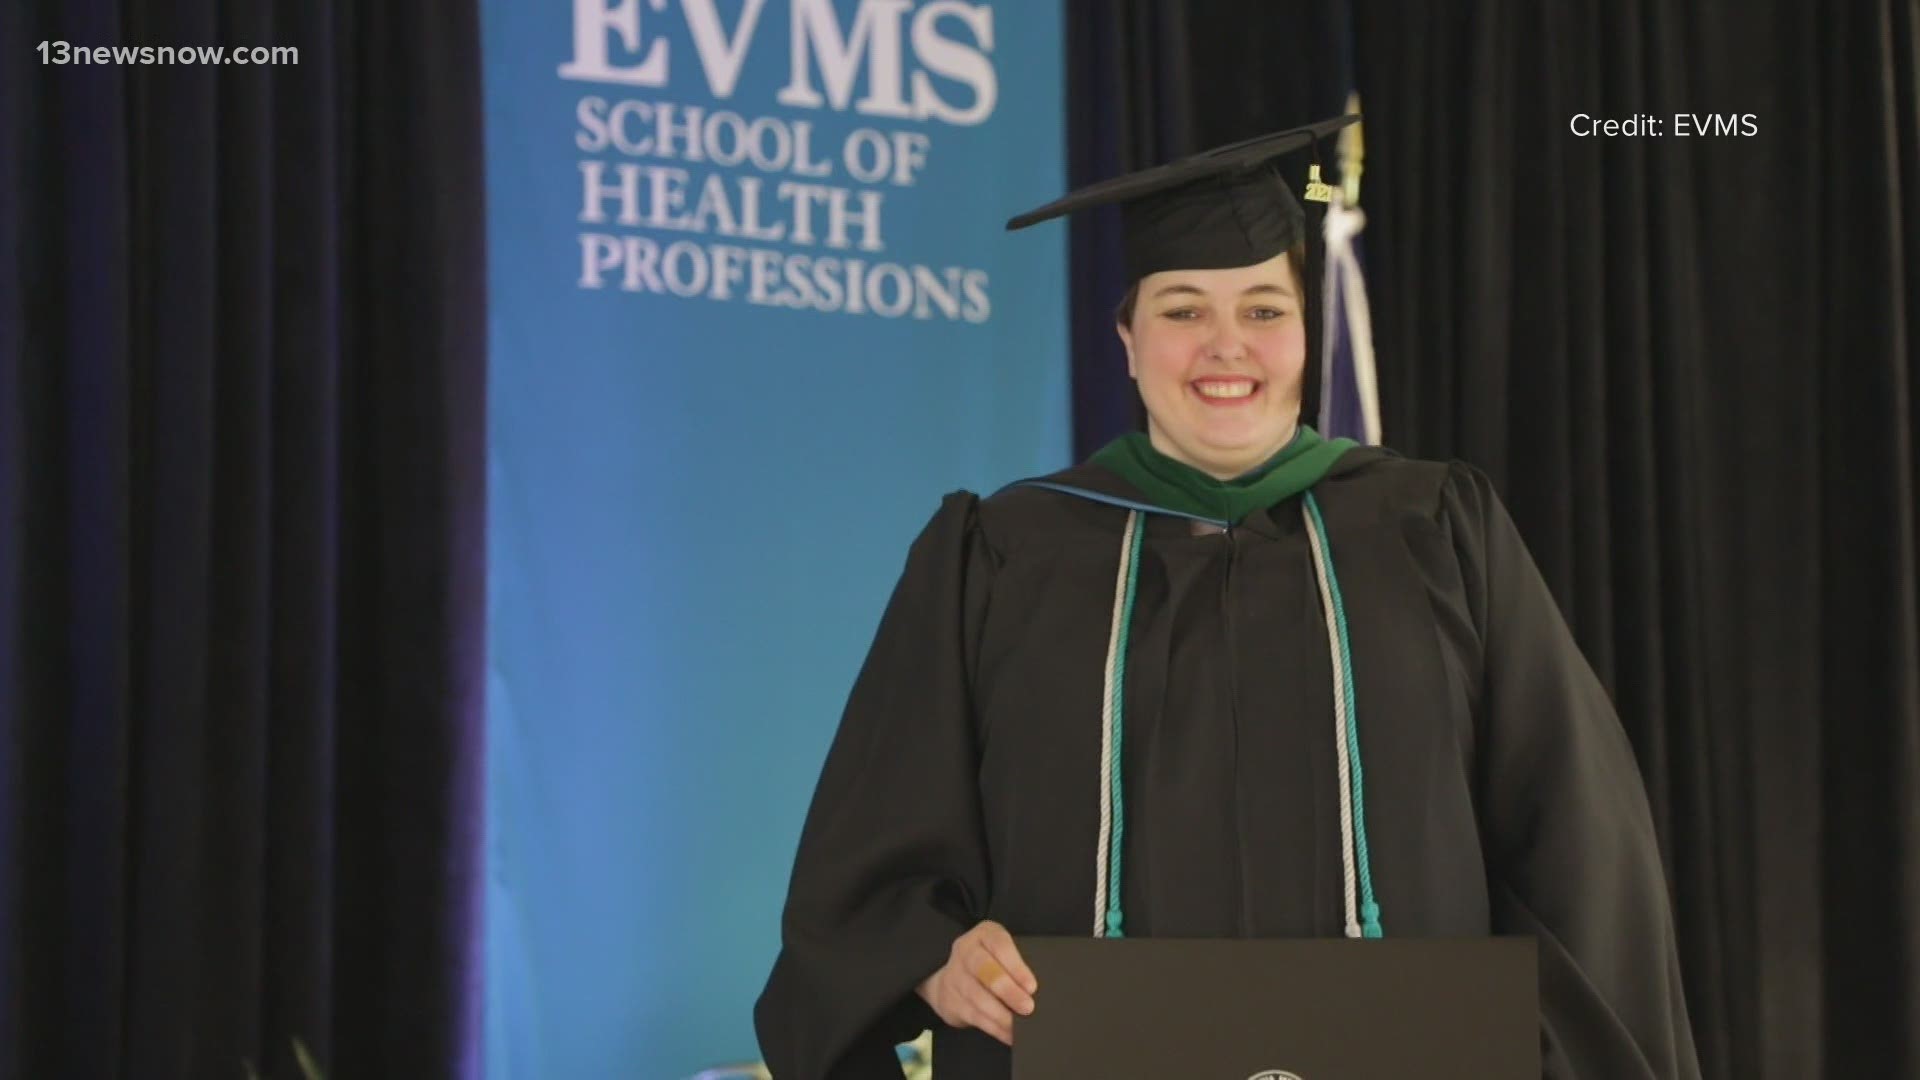 A 29-year-old has been in a wheelchair for a few months now, but on her graduation day, she got up and walked across a stage to receive her diploma.